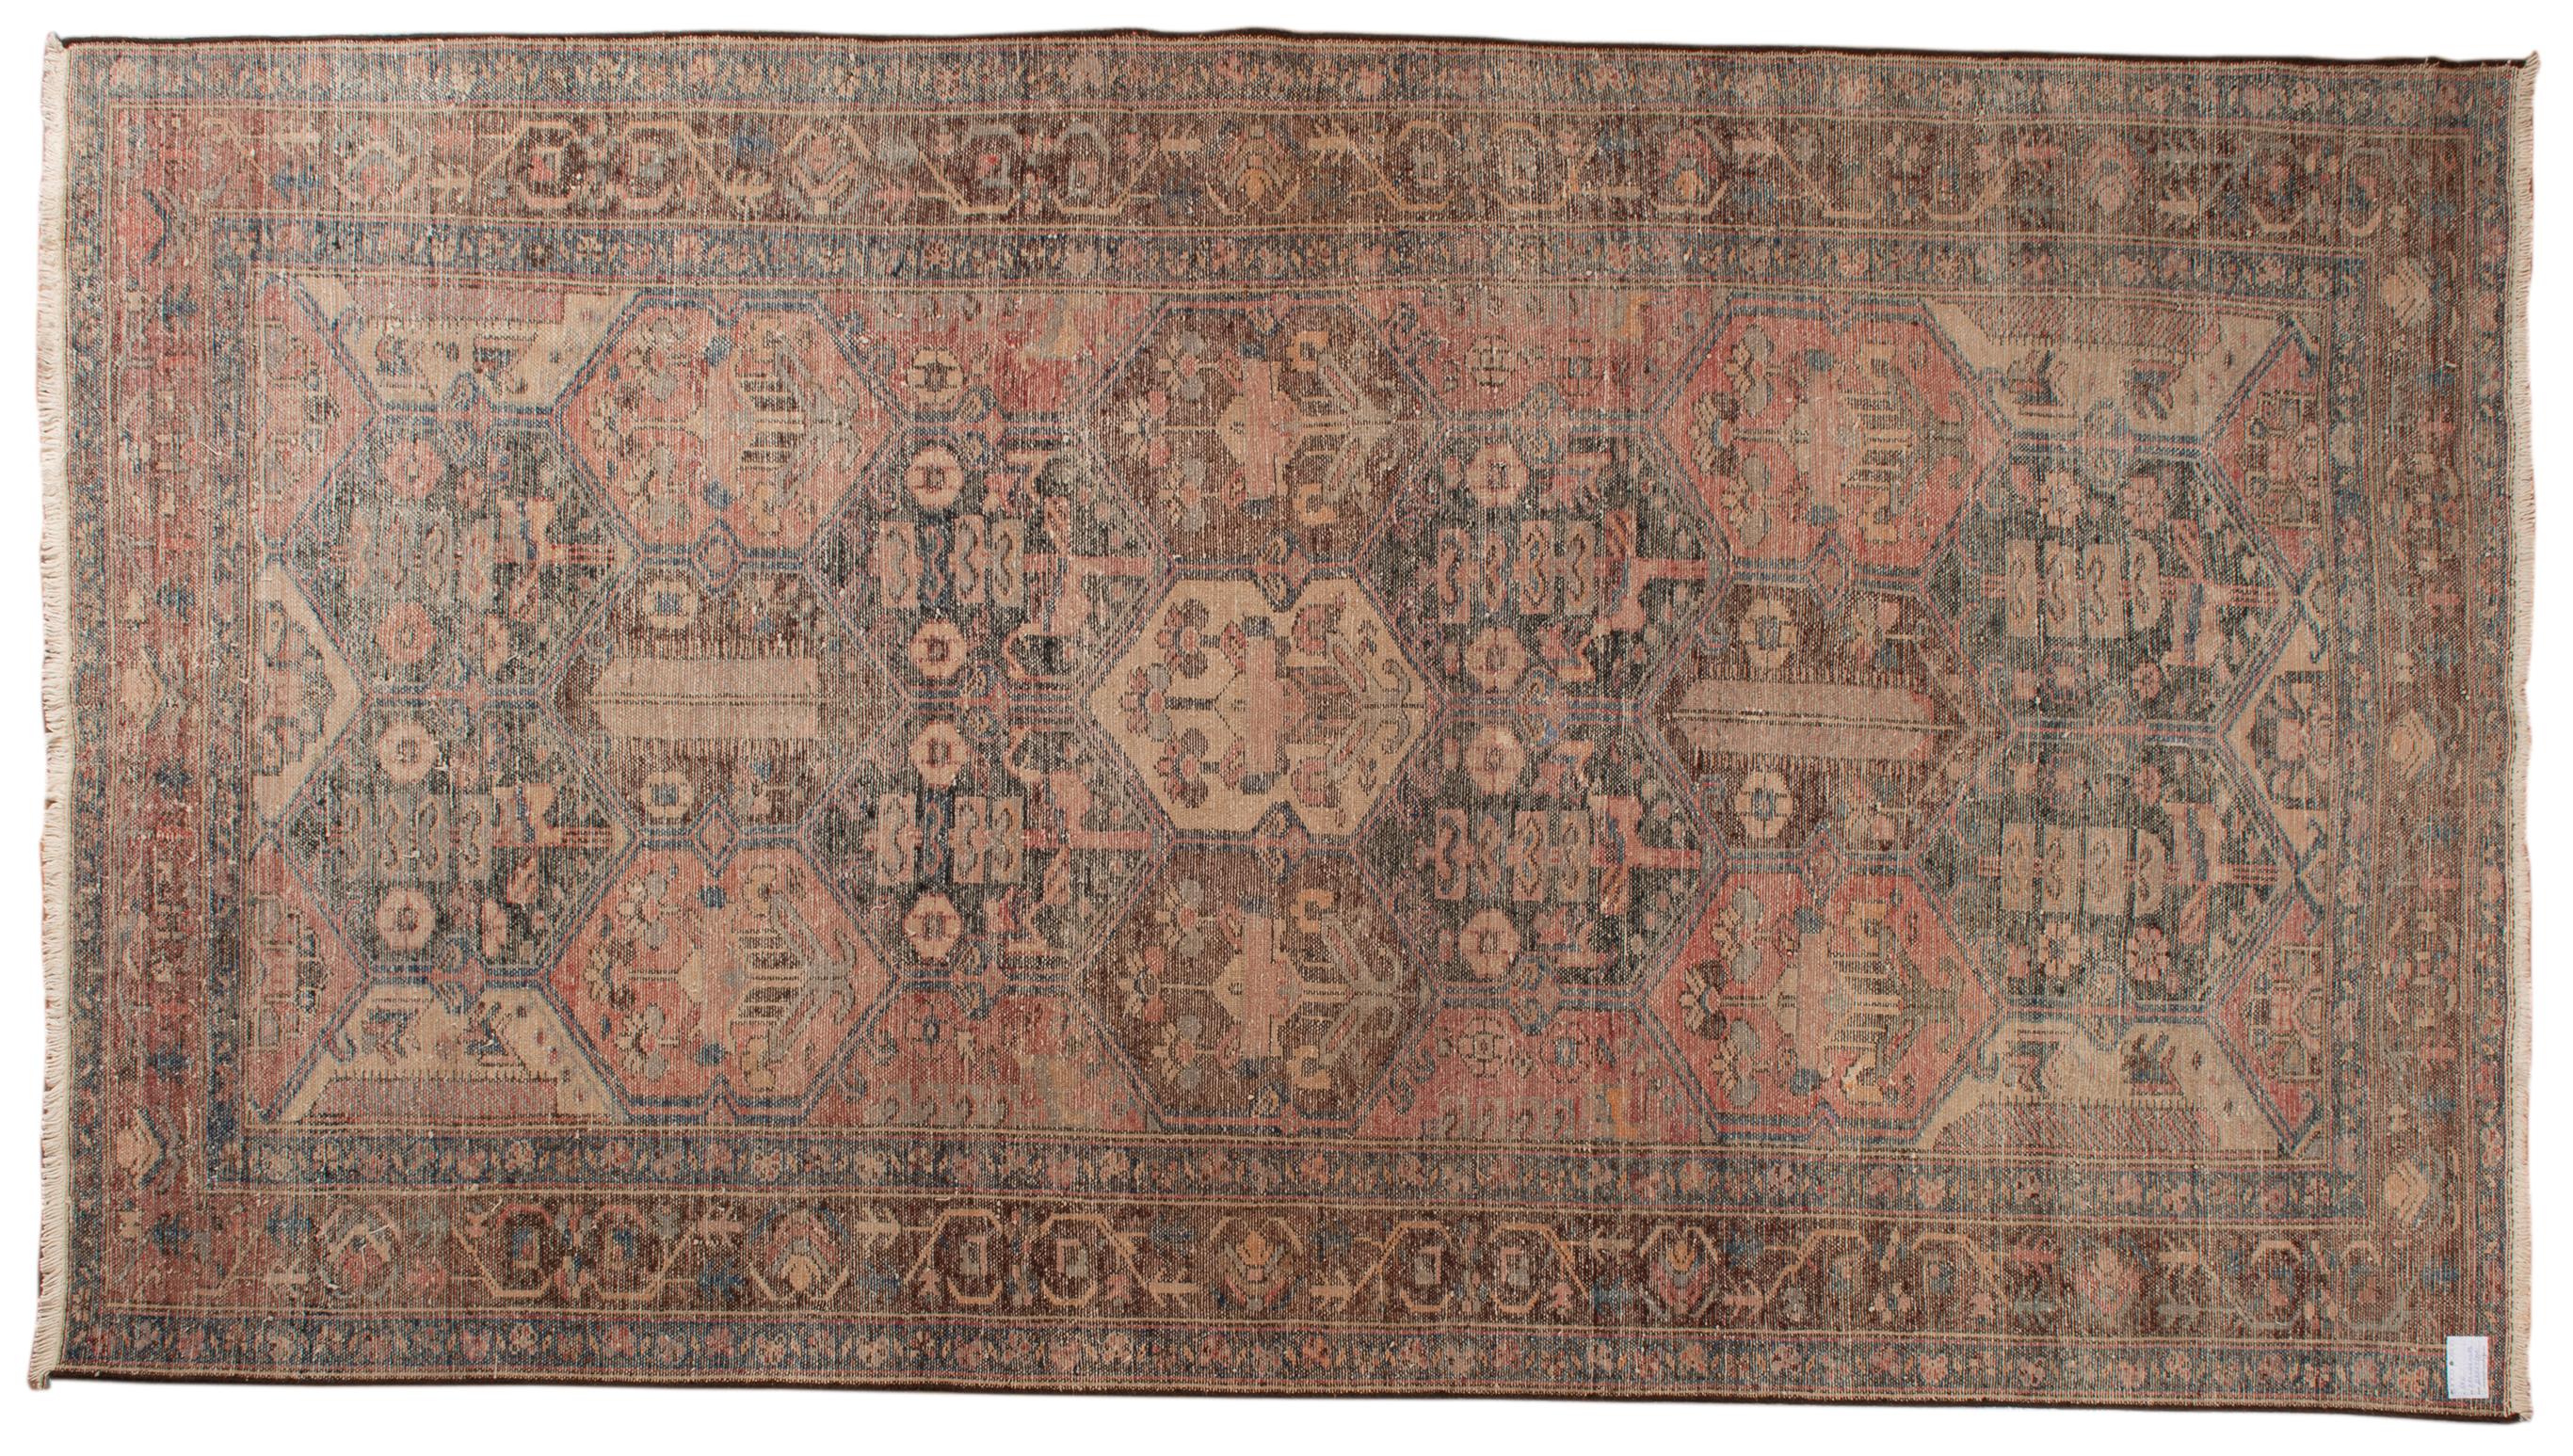 Other Old Armenian Carpet or Rug For Sale